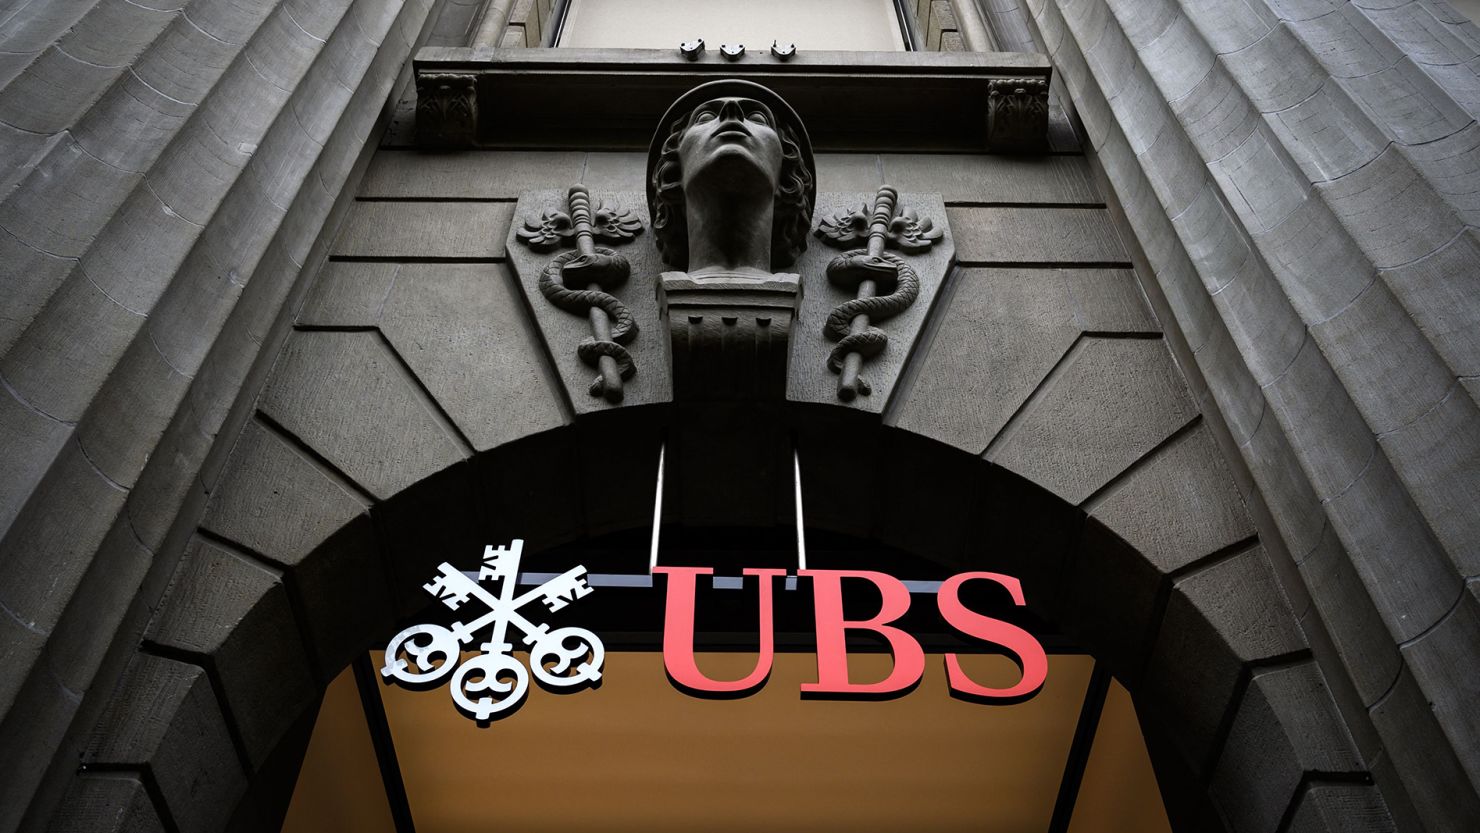 The Zurich headquarters of Swiss banking giant UBS.